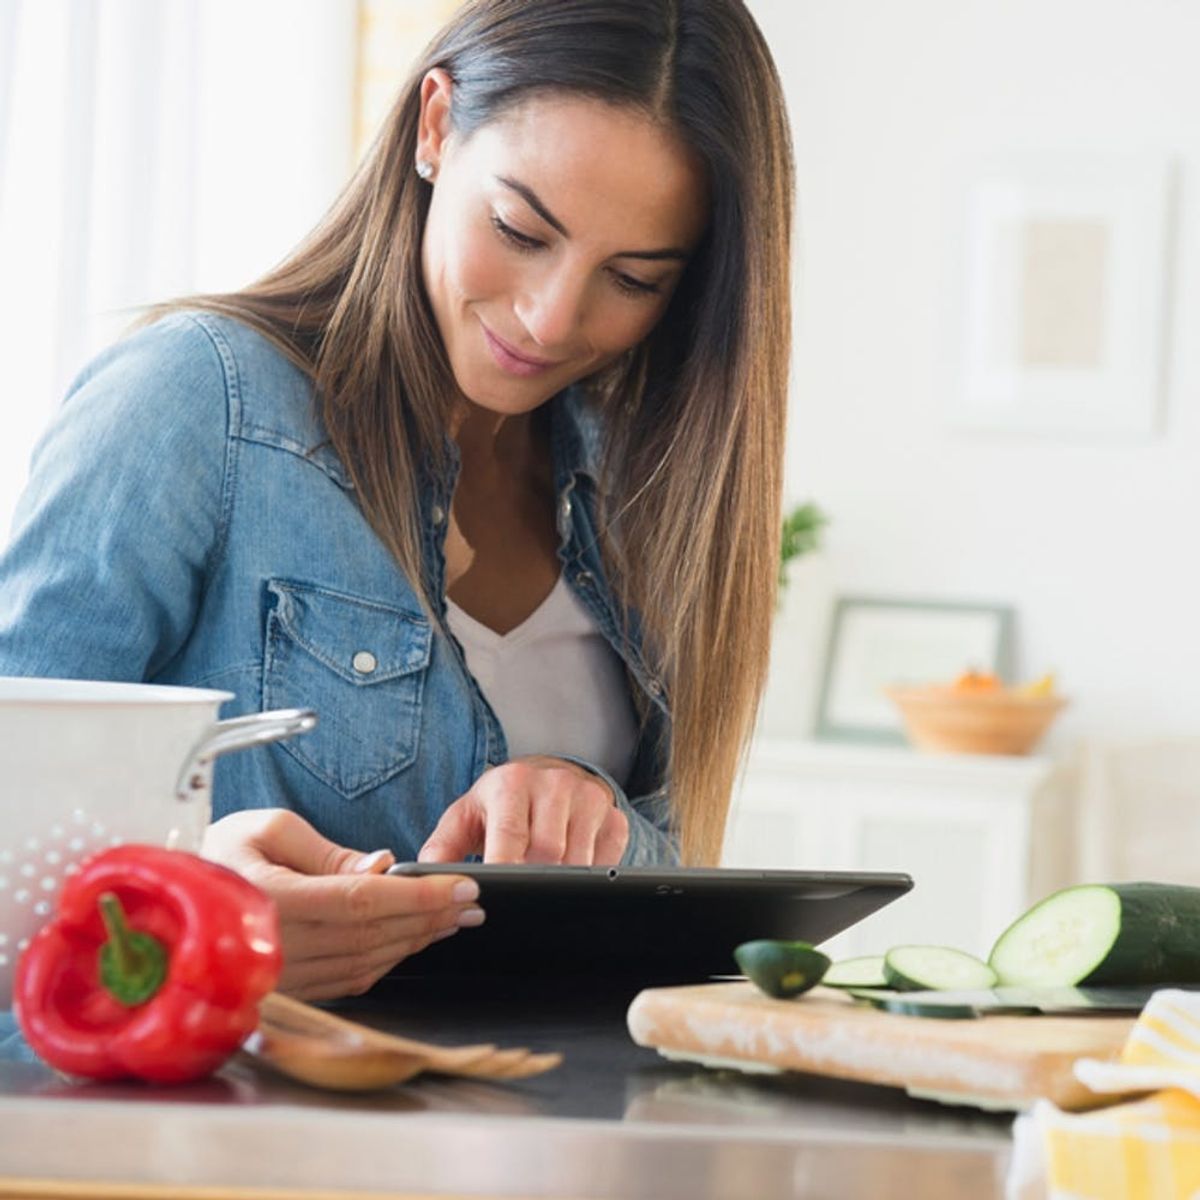 6 Strategies to Take the Stress Out of Healthy Meal Planning